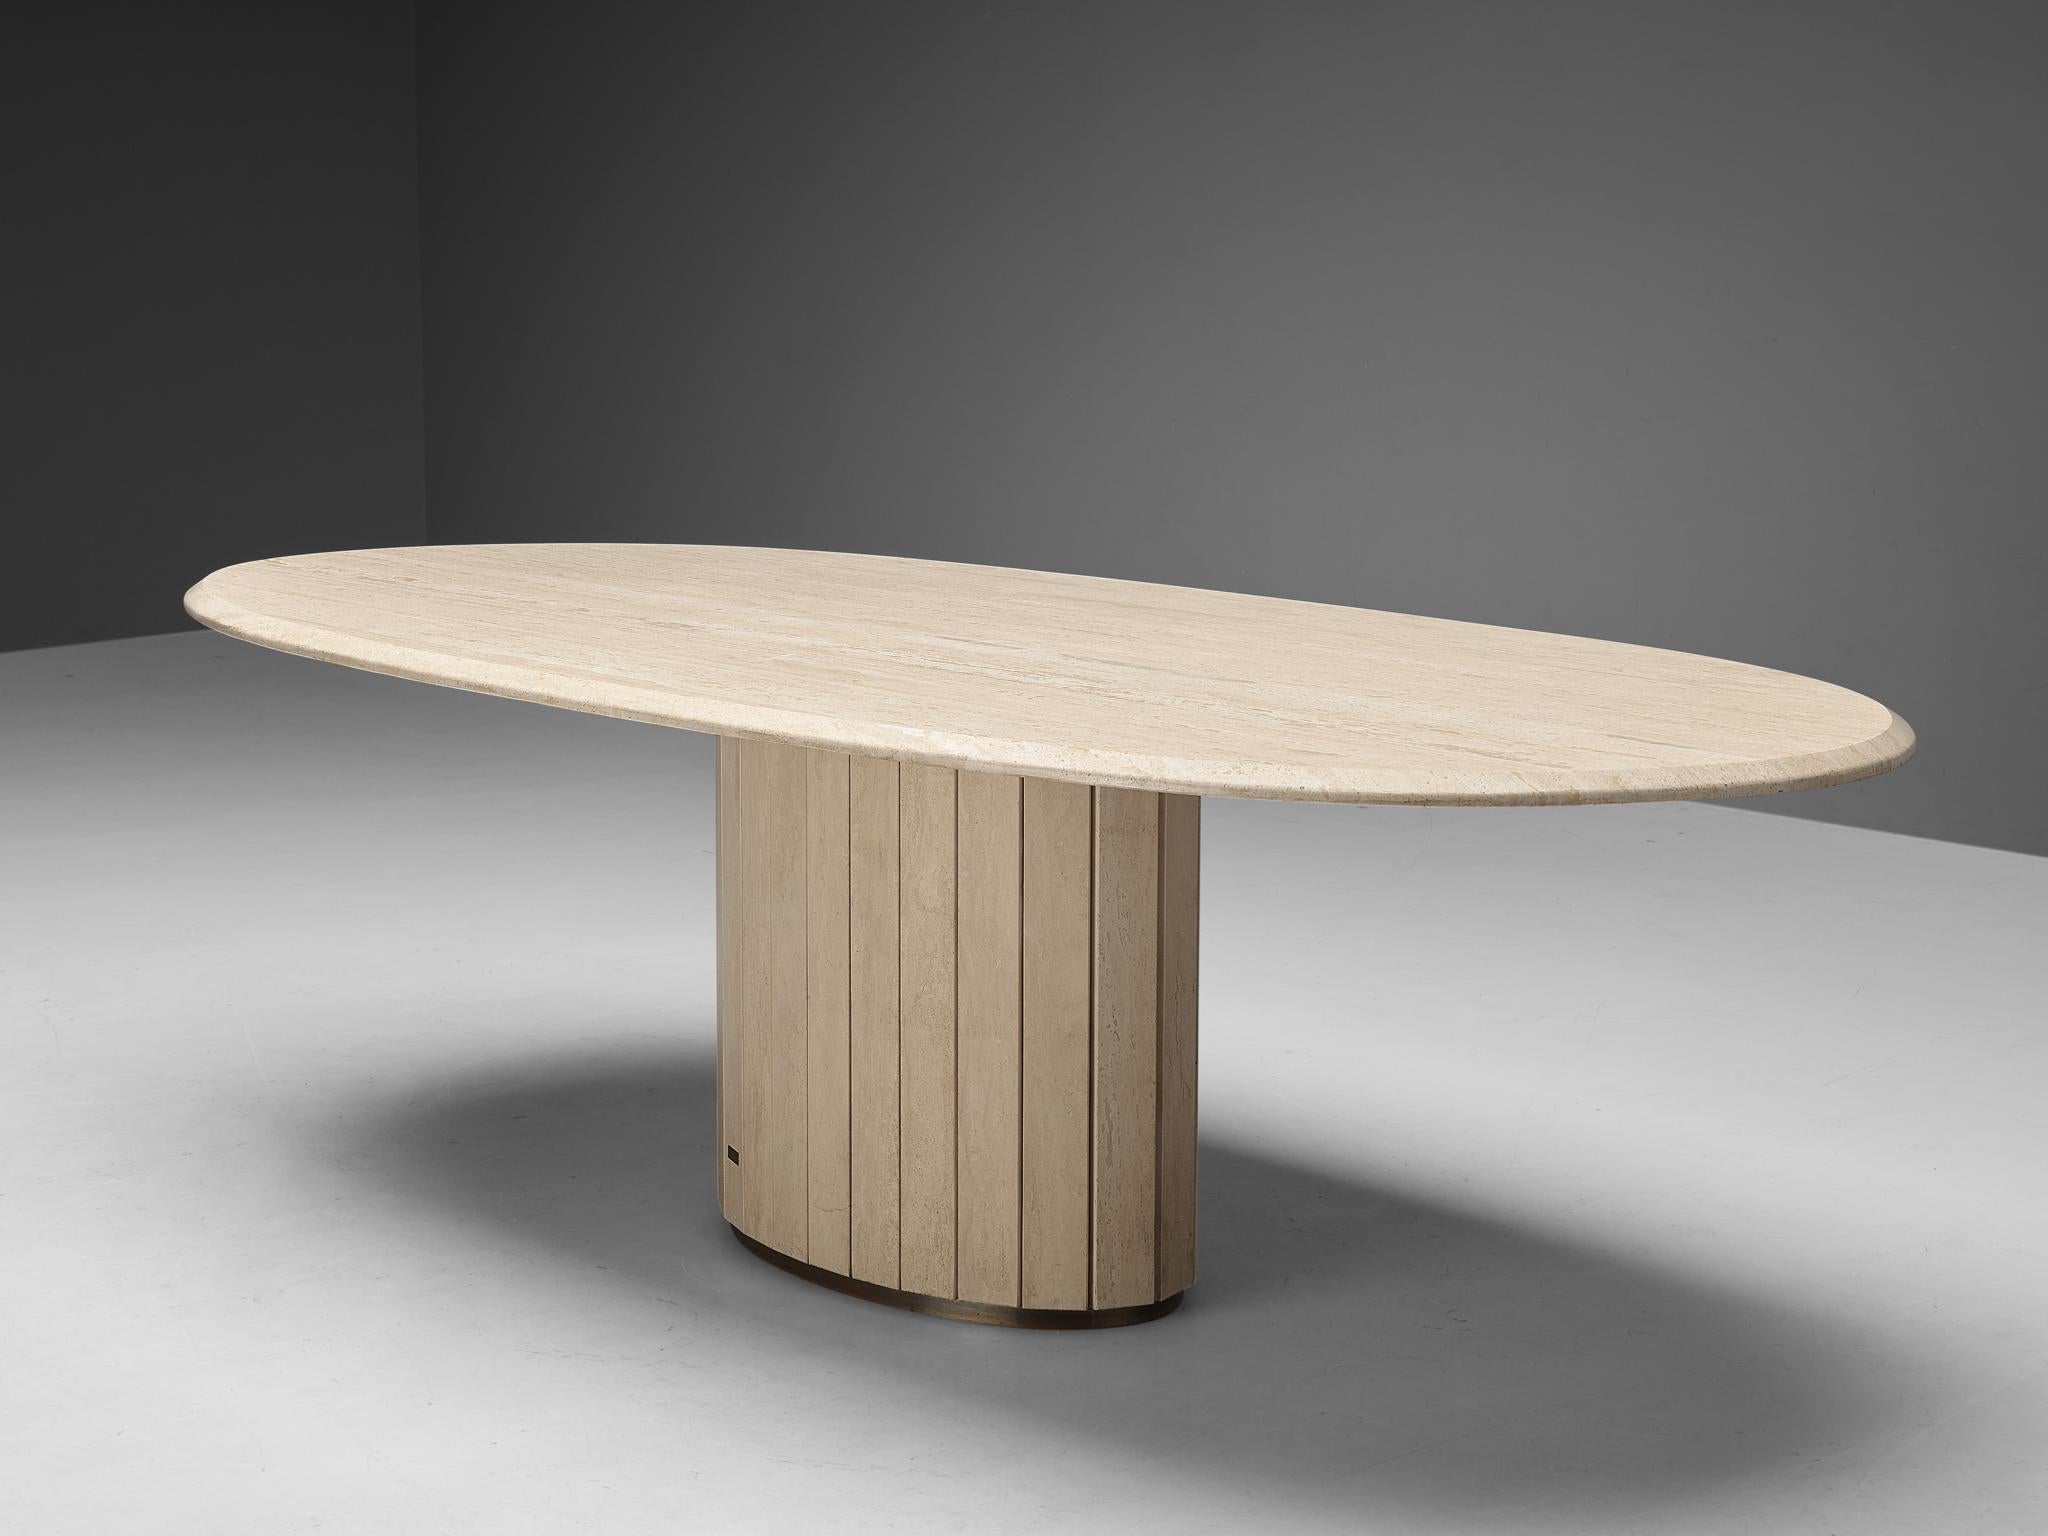 Jean Charles, table, travertine, brass, Italy, 1970s.

Jean Charles created an eccentric table with a certain monochrome, sculptural look, which is achieved by exclusively using travertine, a natural stone from Italy. The body holds an intricate